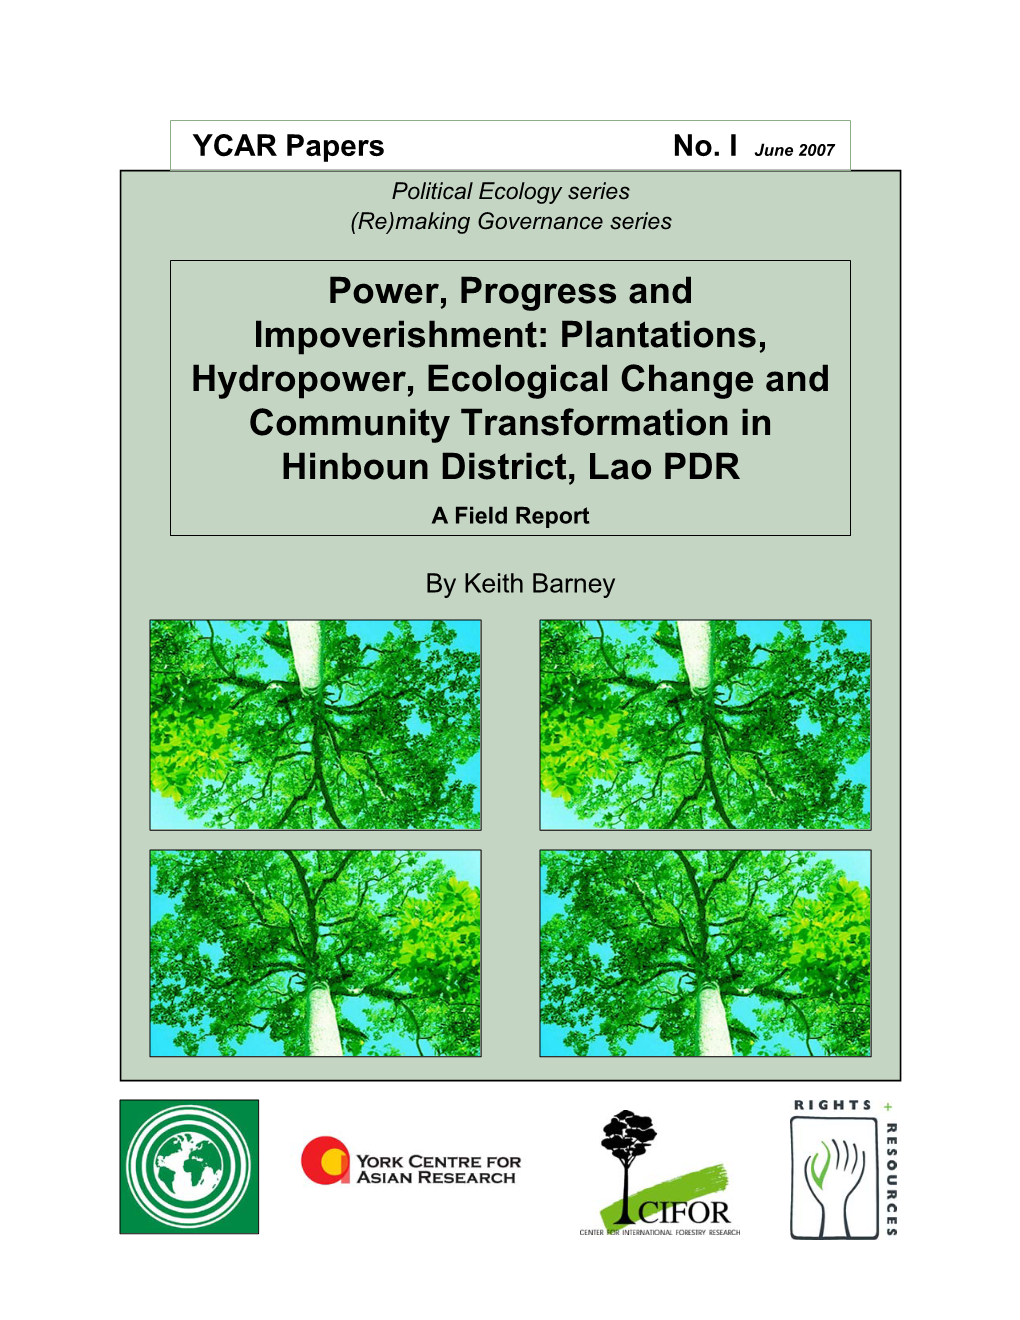 Power, Progress and Impoverishment: Plantations, Hydropower, Ecological Change and Community Transformation in Hinboun District, Lao PDR a Field Report